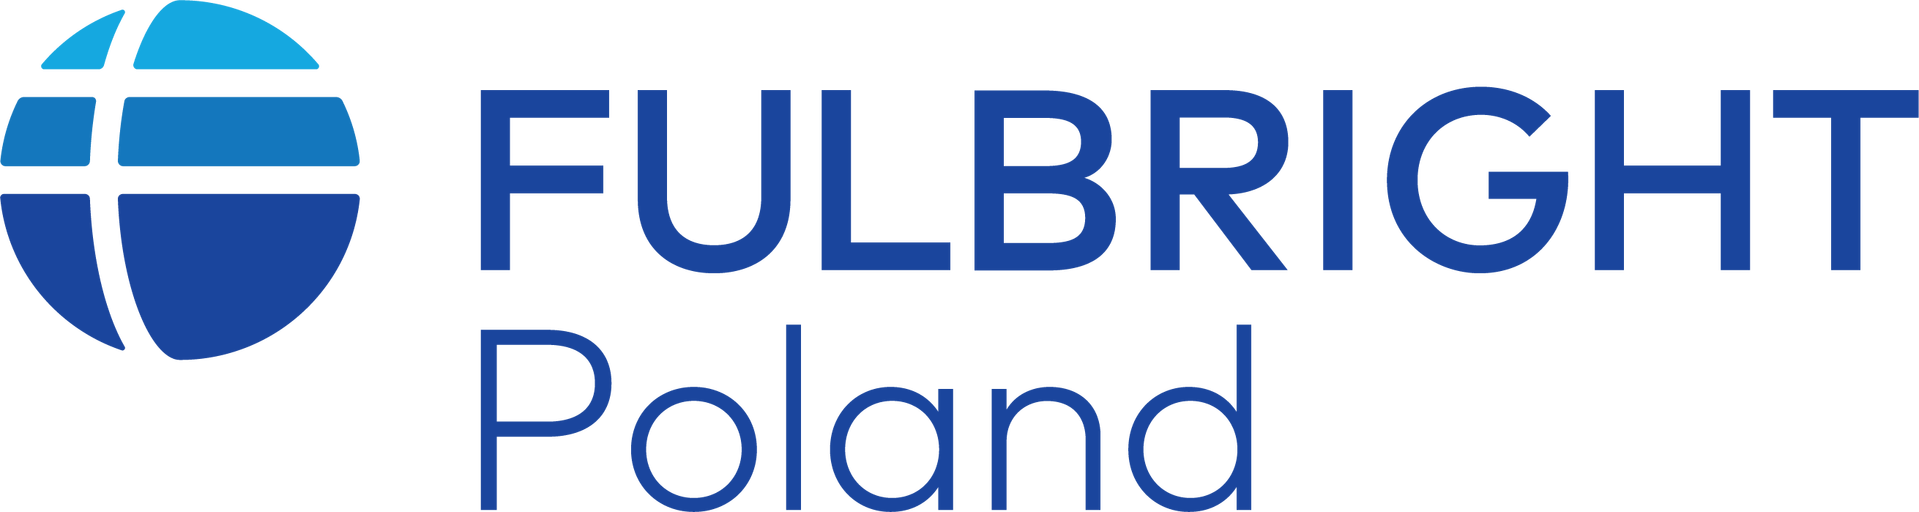 fulbright_new_logo_1.png